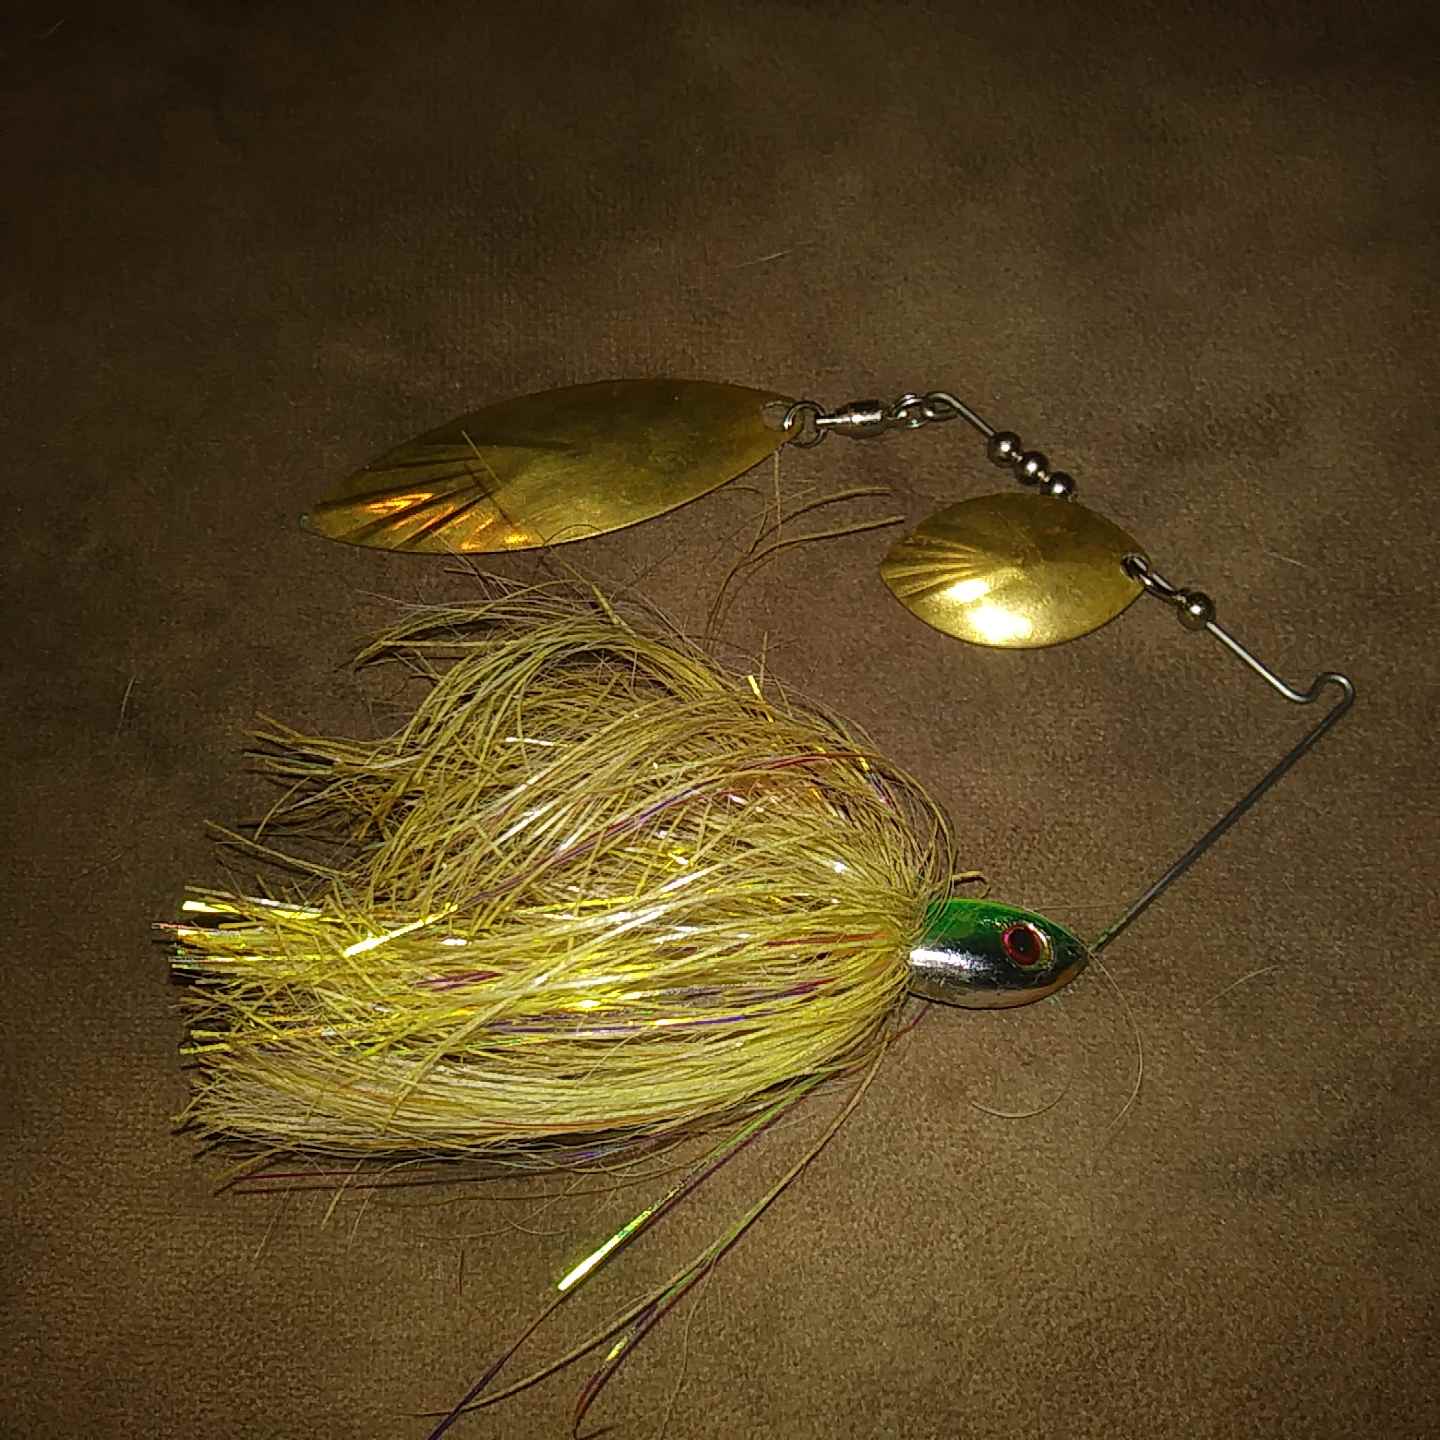 Favorite spinnerbait weight and color - Fishing Tackle - Bass Fishing Forums